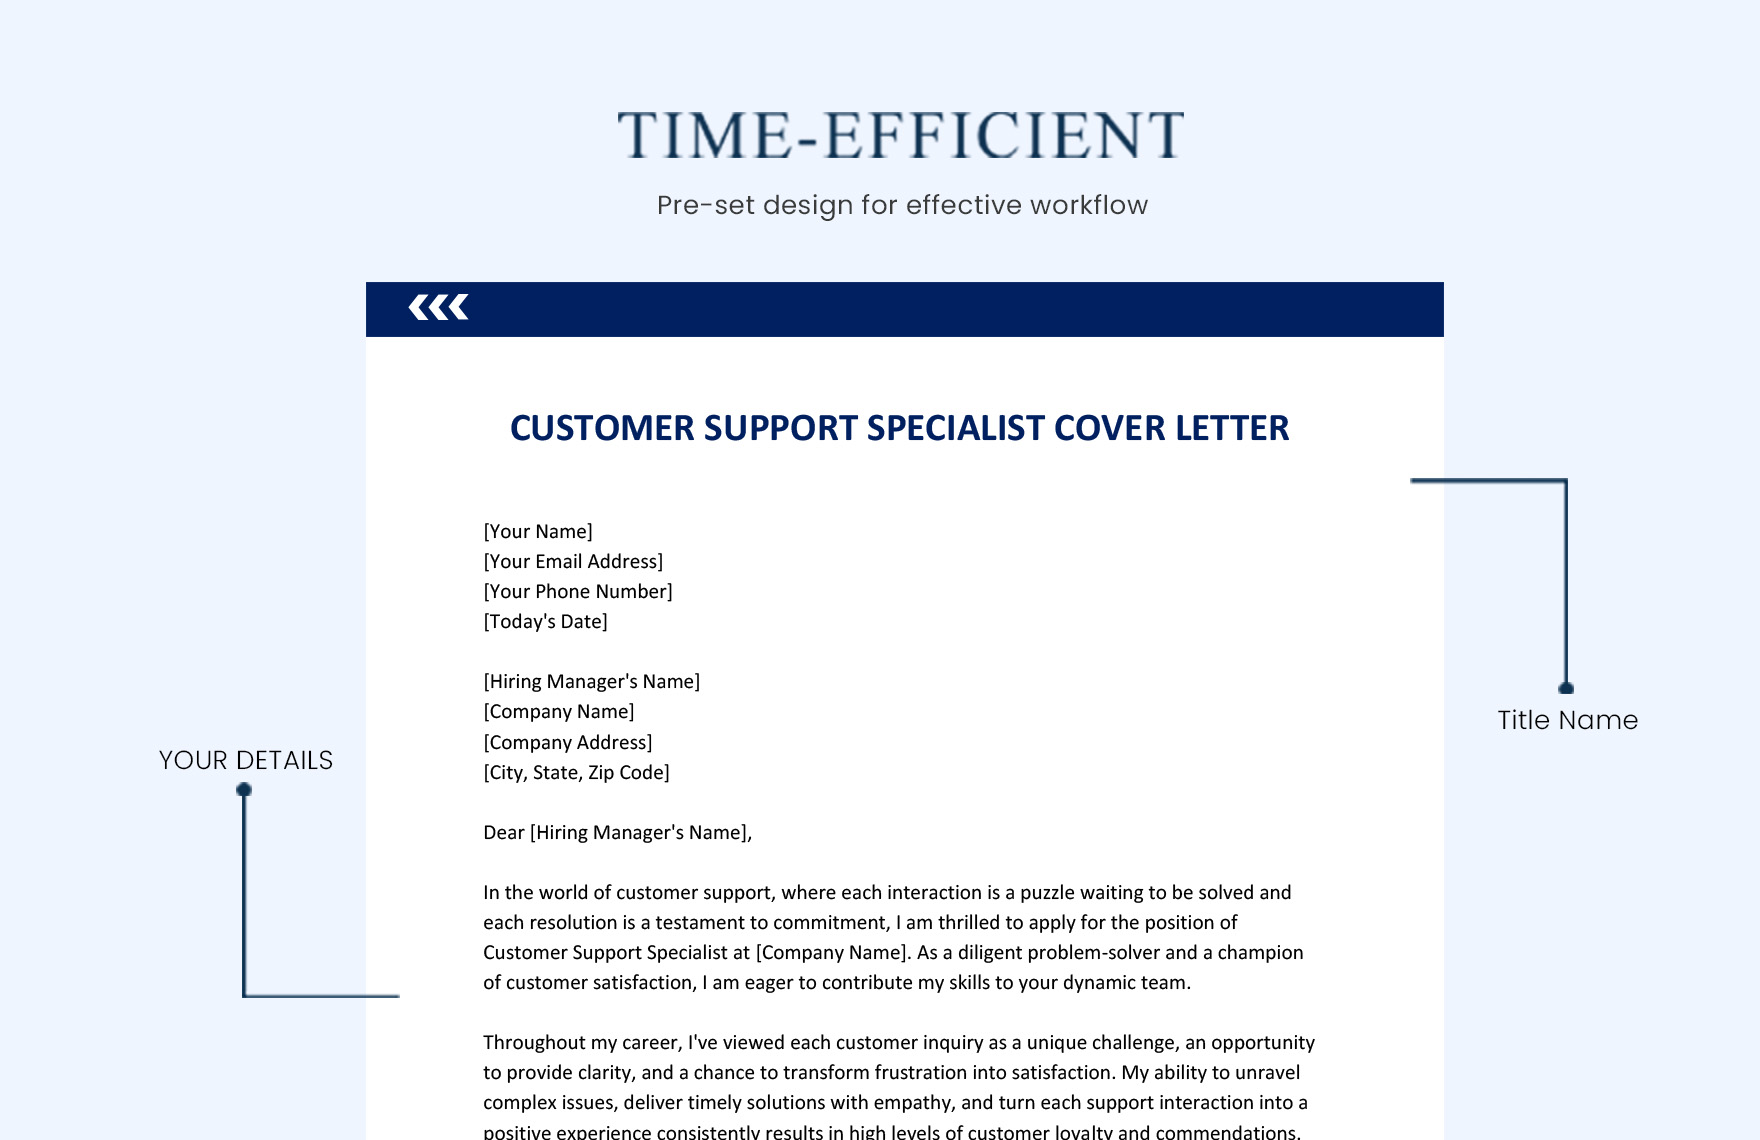 customer support specialist cover letter samples